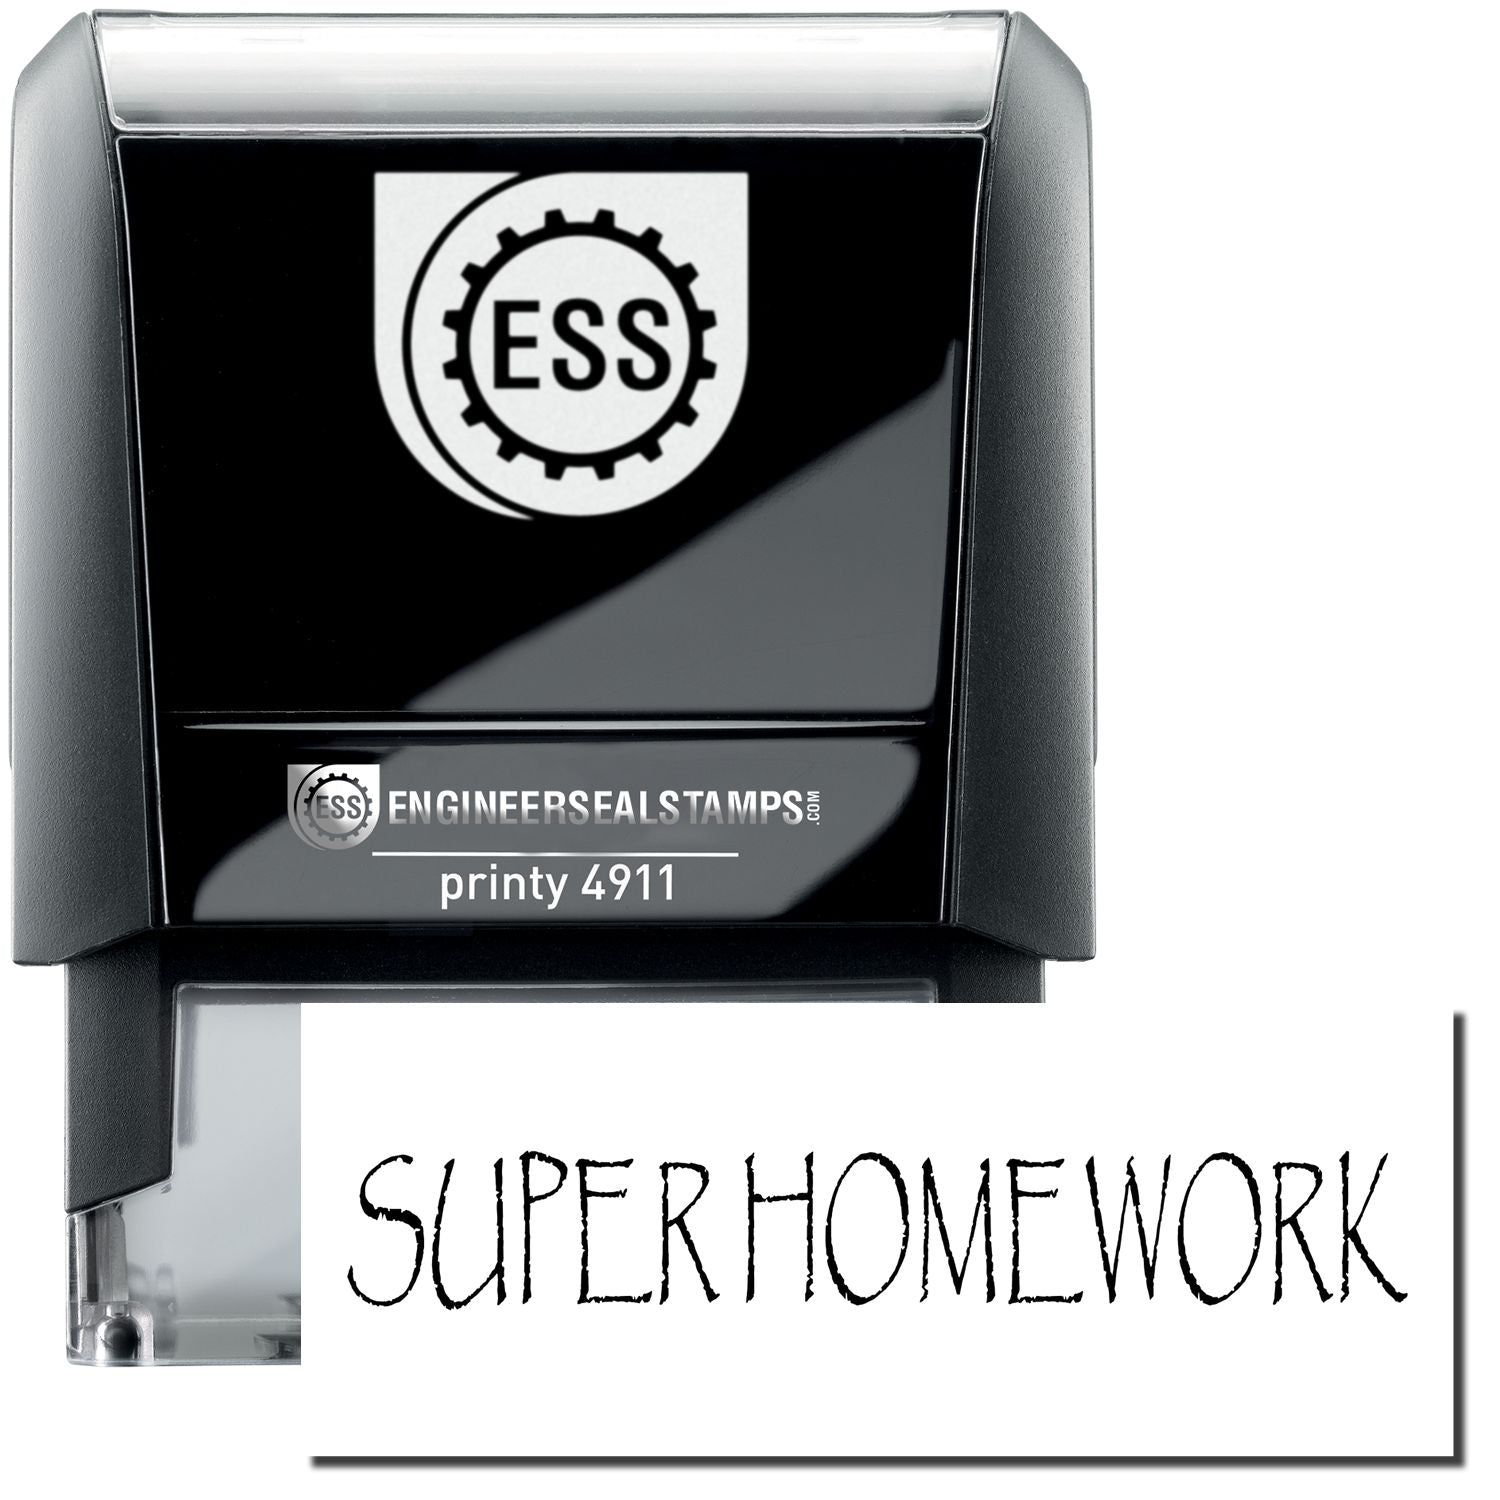 A self-inking stamp with a stamped image showing how the text "SUPER HOMEWORK" is displayed after stamping.